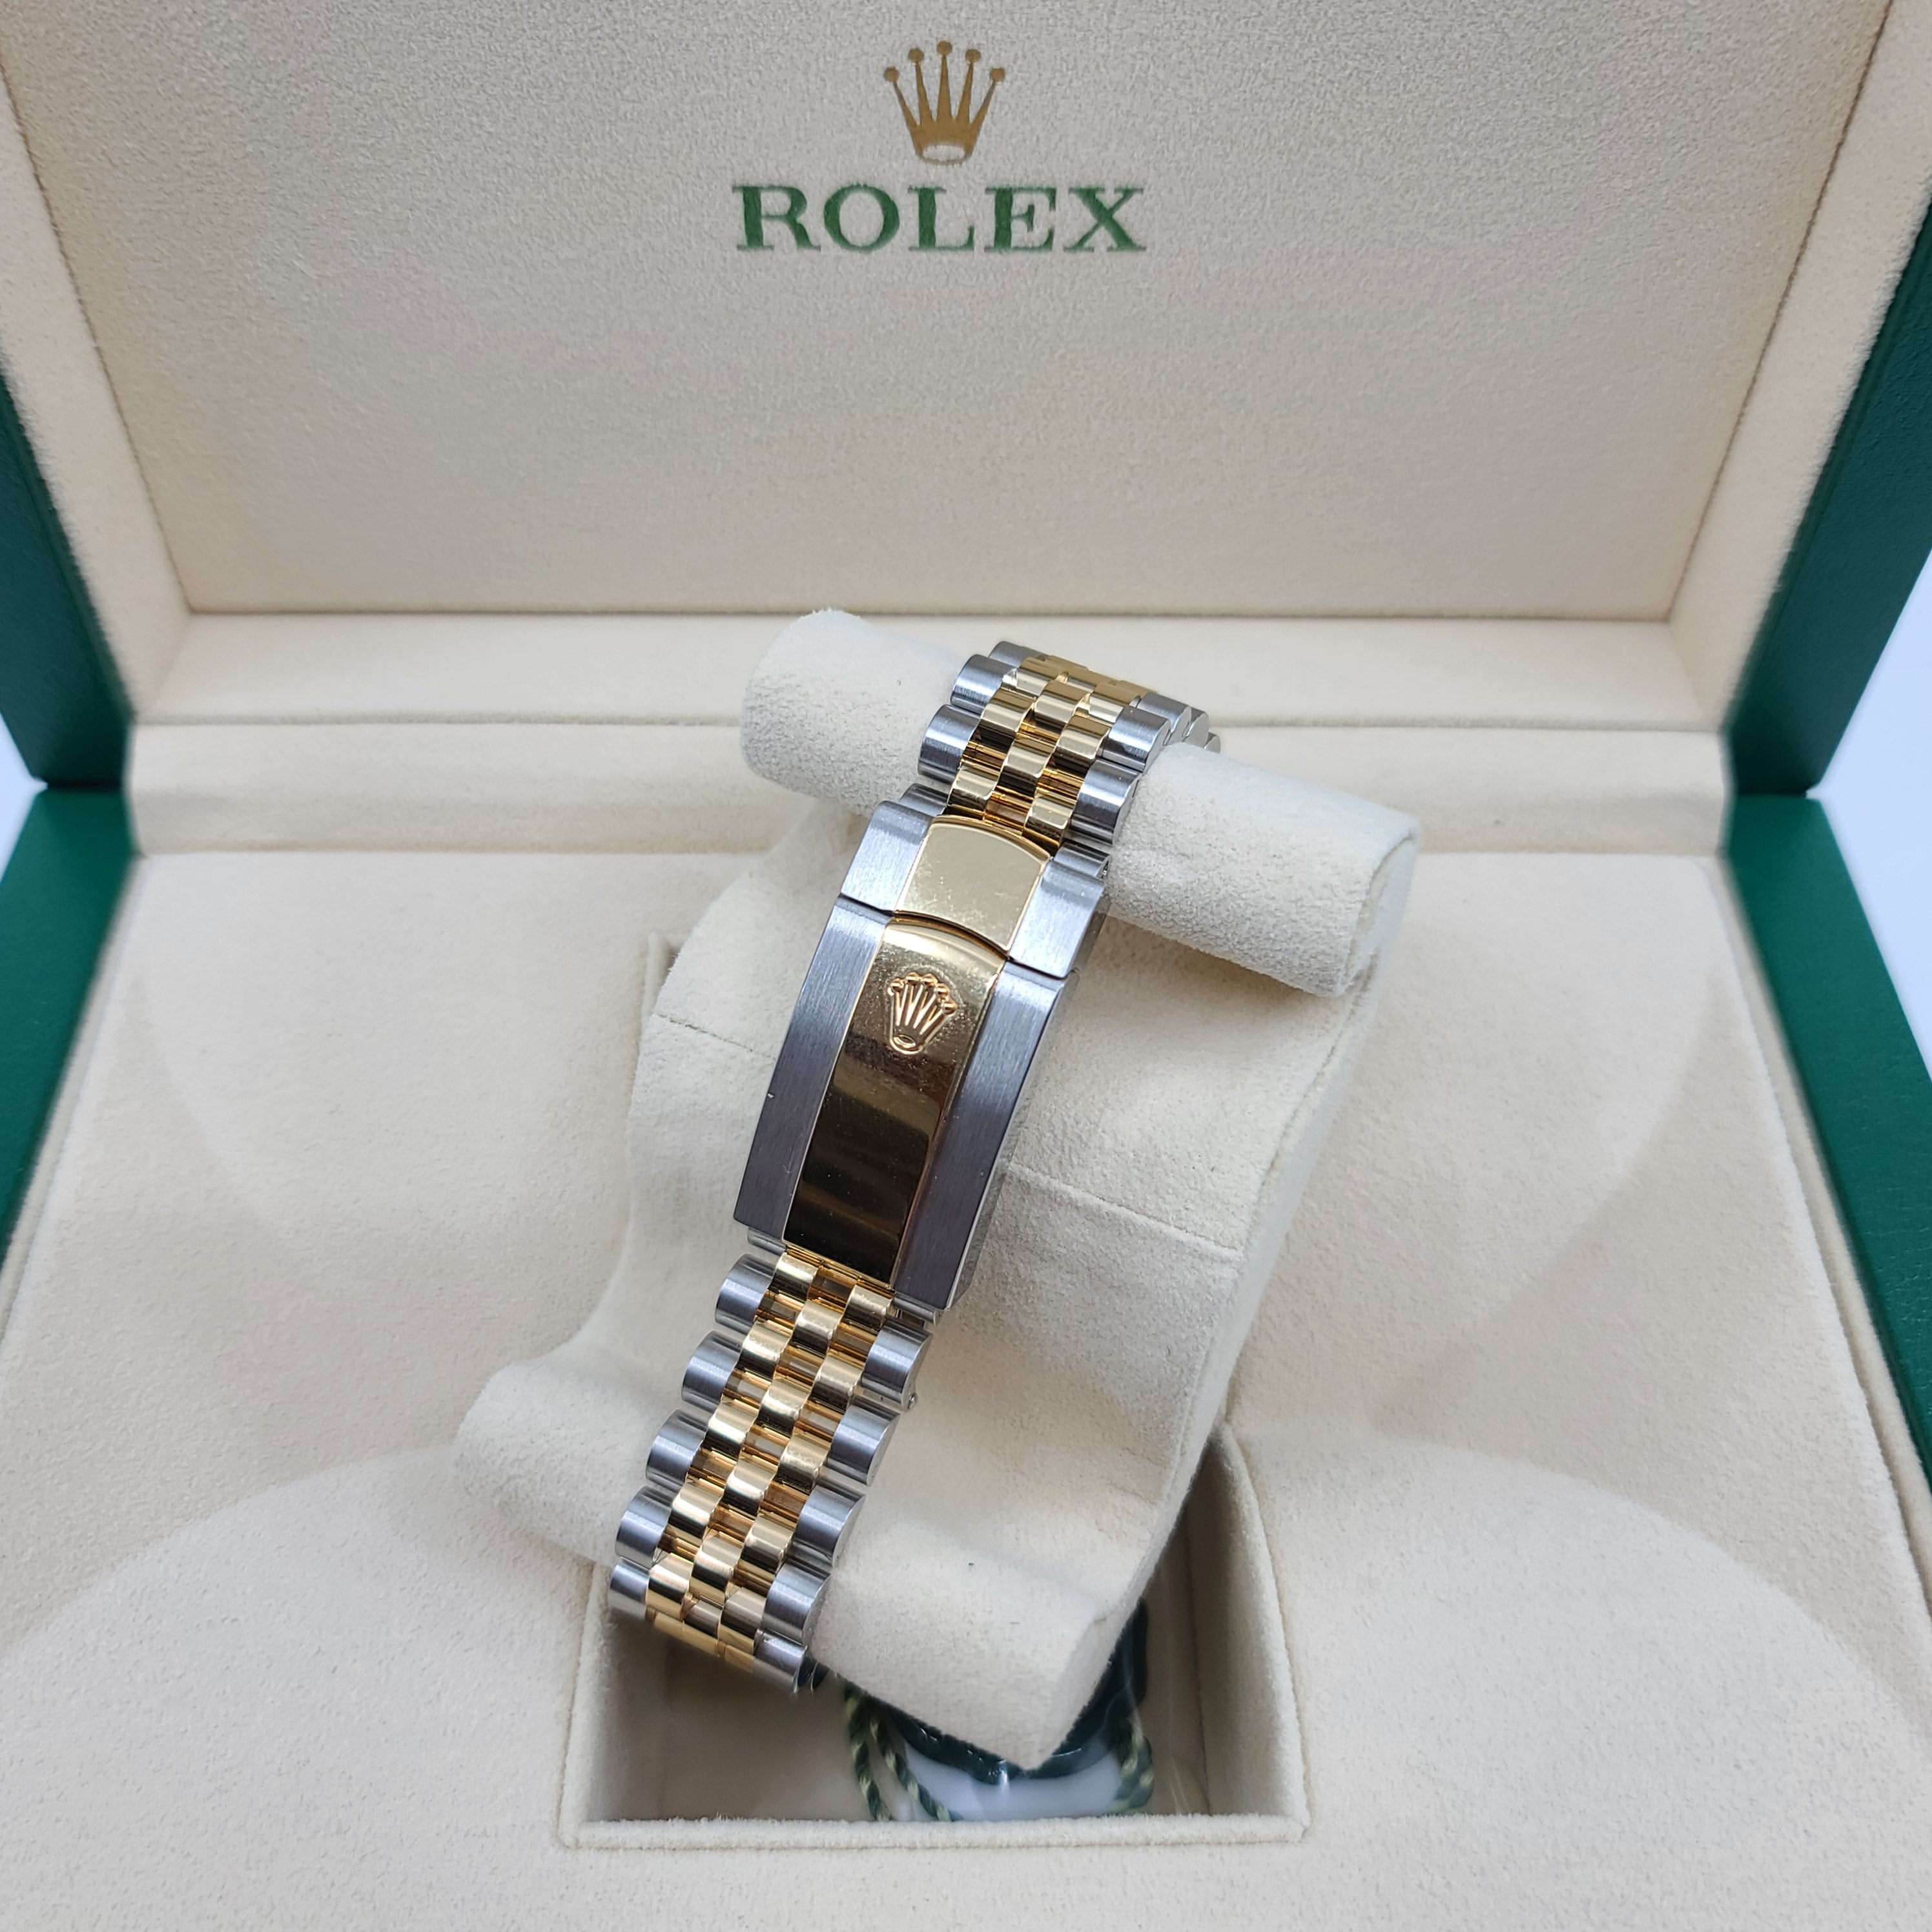 Rolex Datejust 41 NEW 2023 Wimbledon Gray Green Roman Dial... for $11,595  for sale from a Trusted Seller on Chrono24